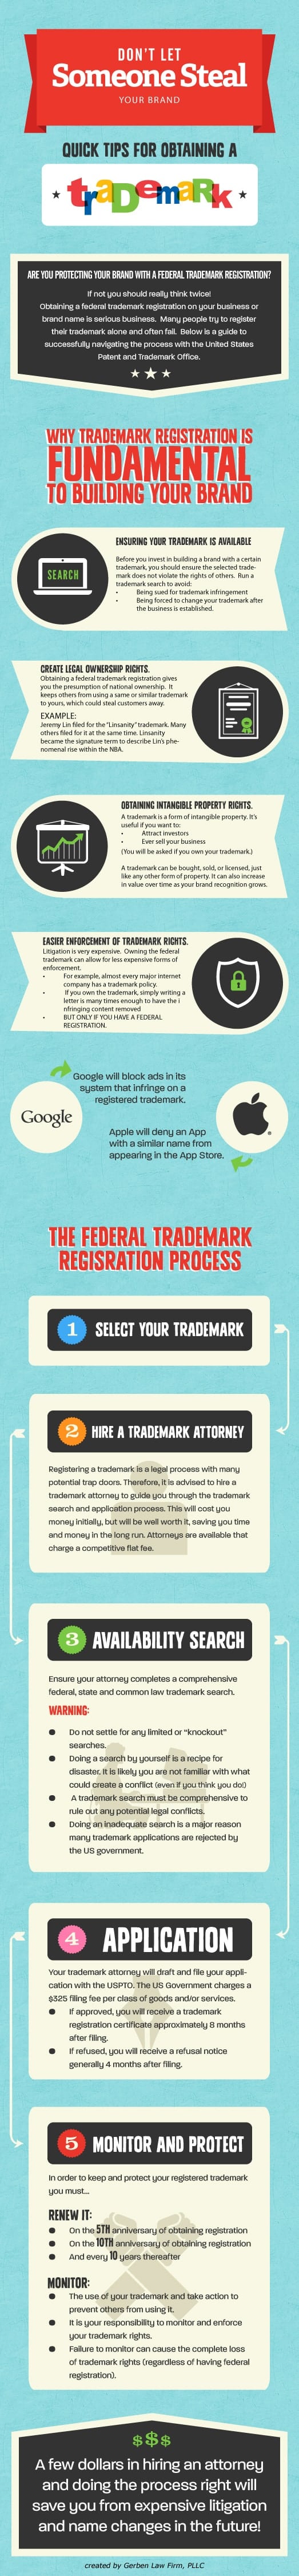 graphic-tips-for-obtaining-trademark